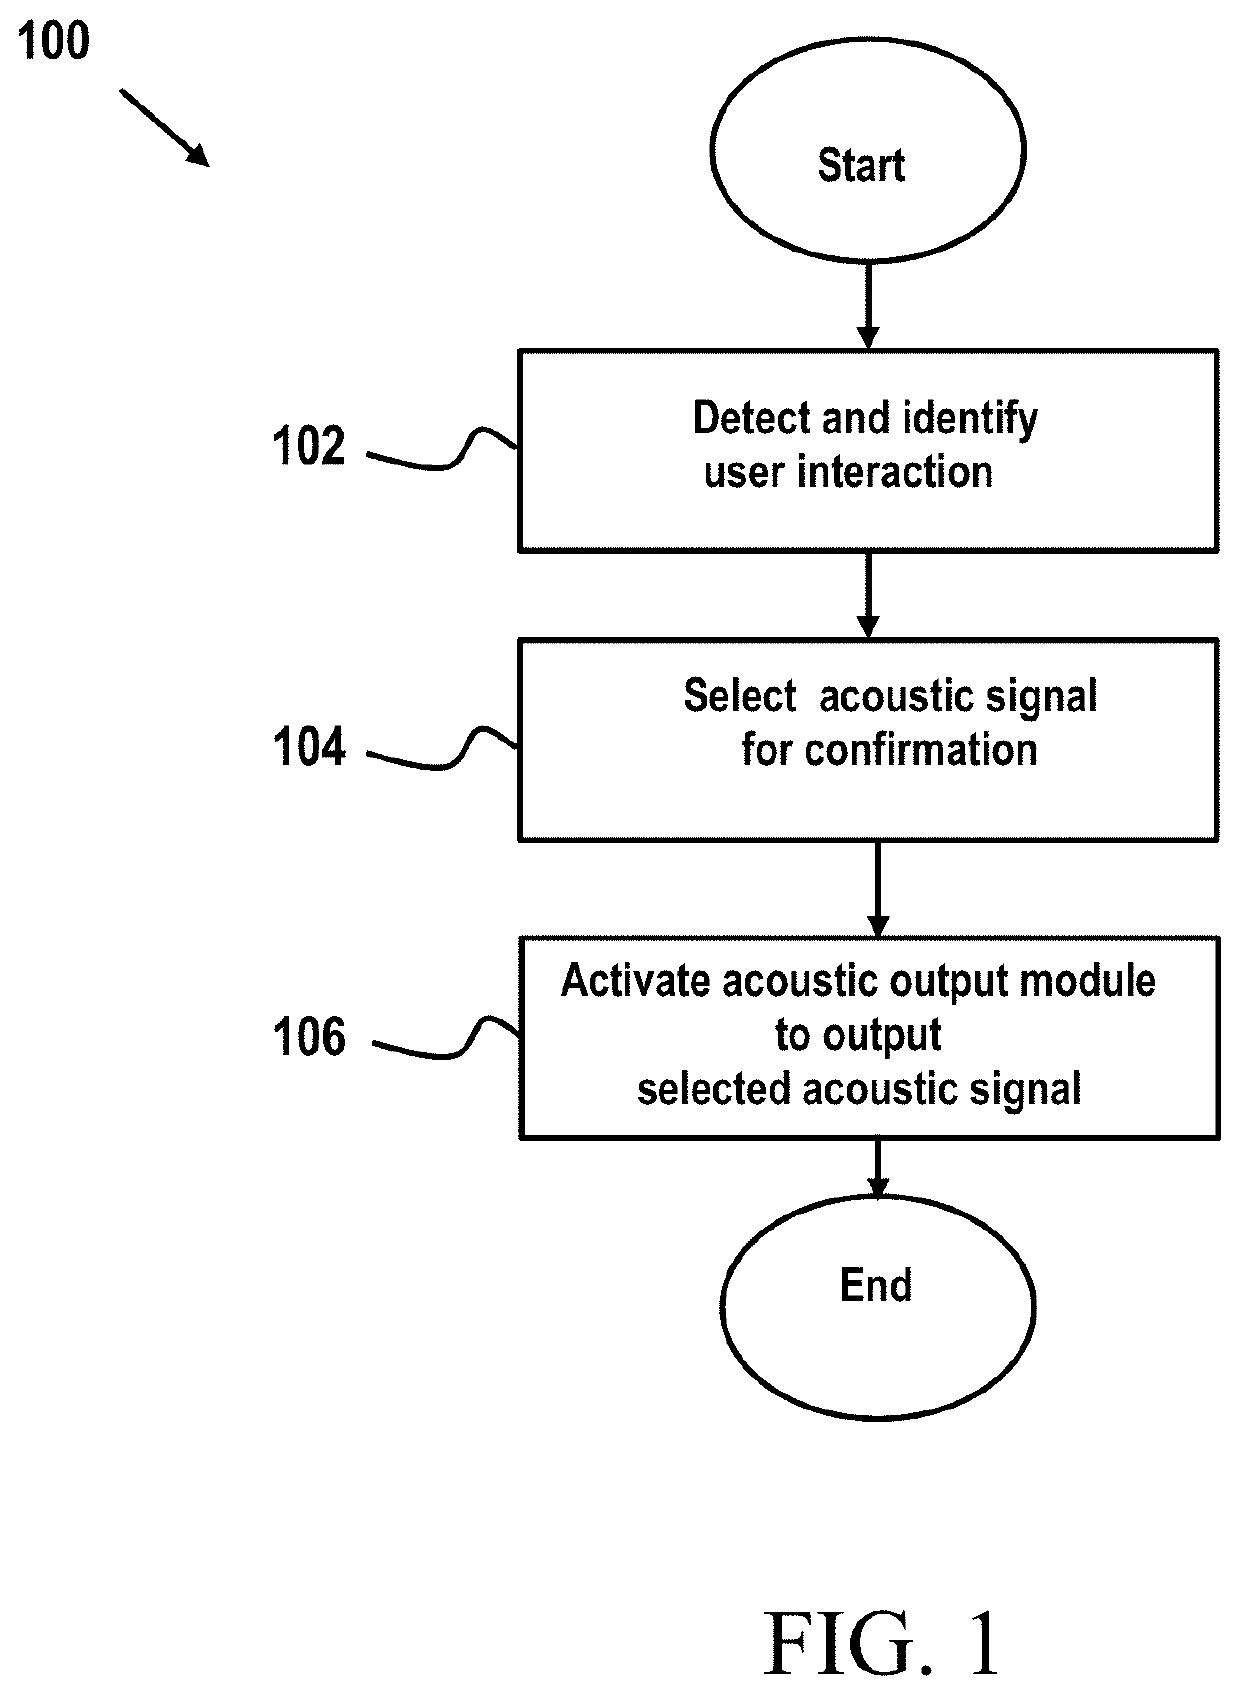 Acoustic user interface